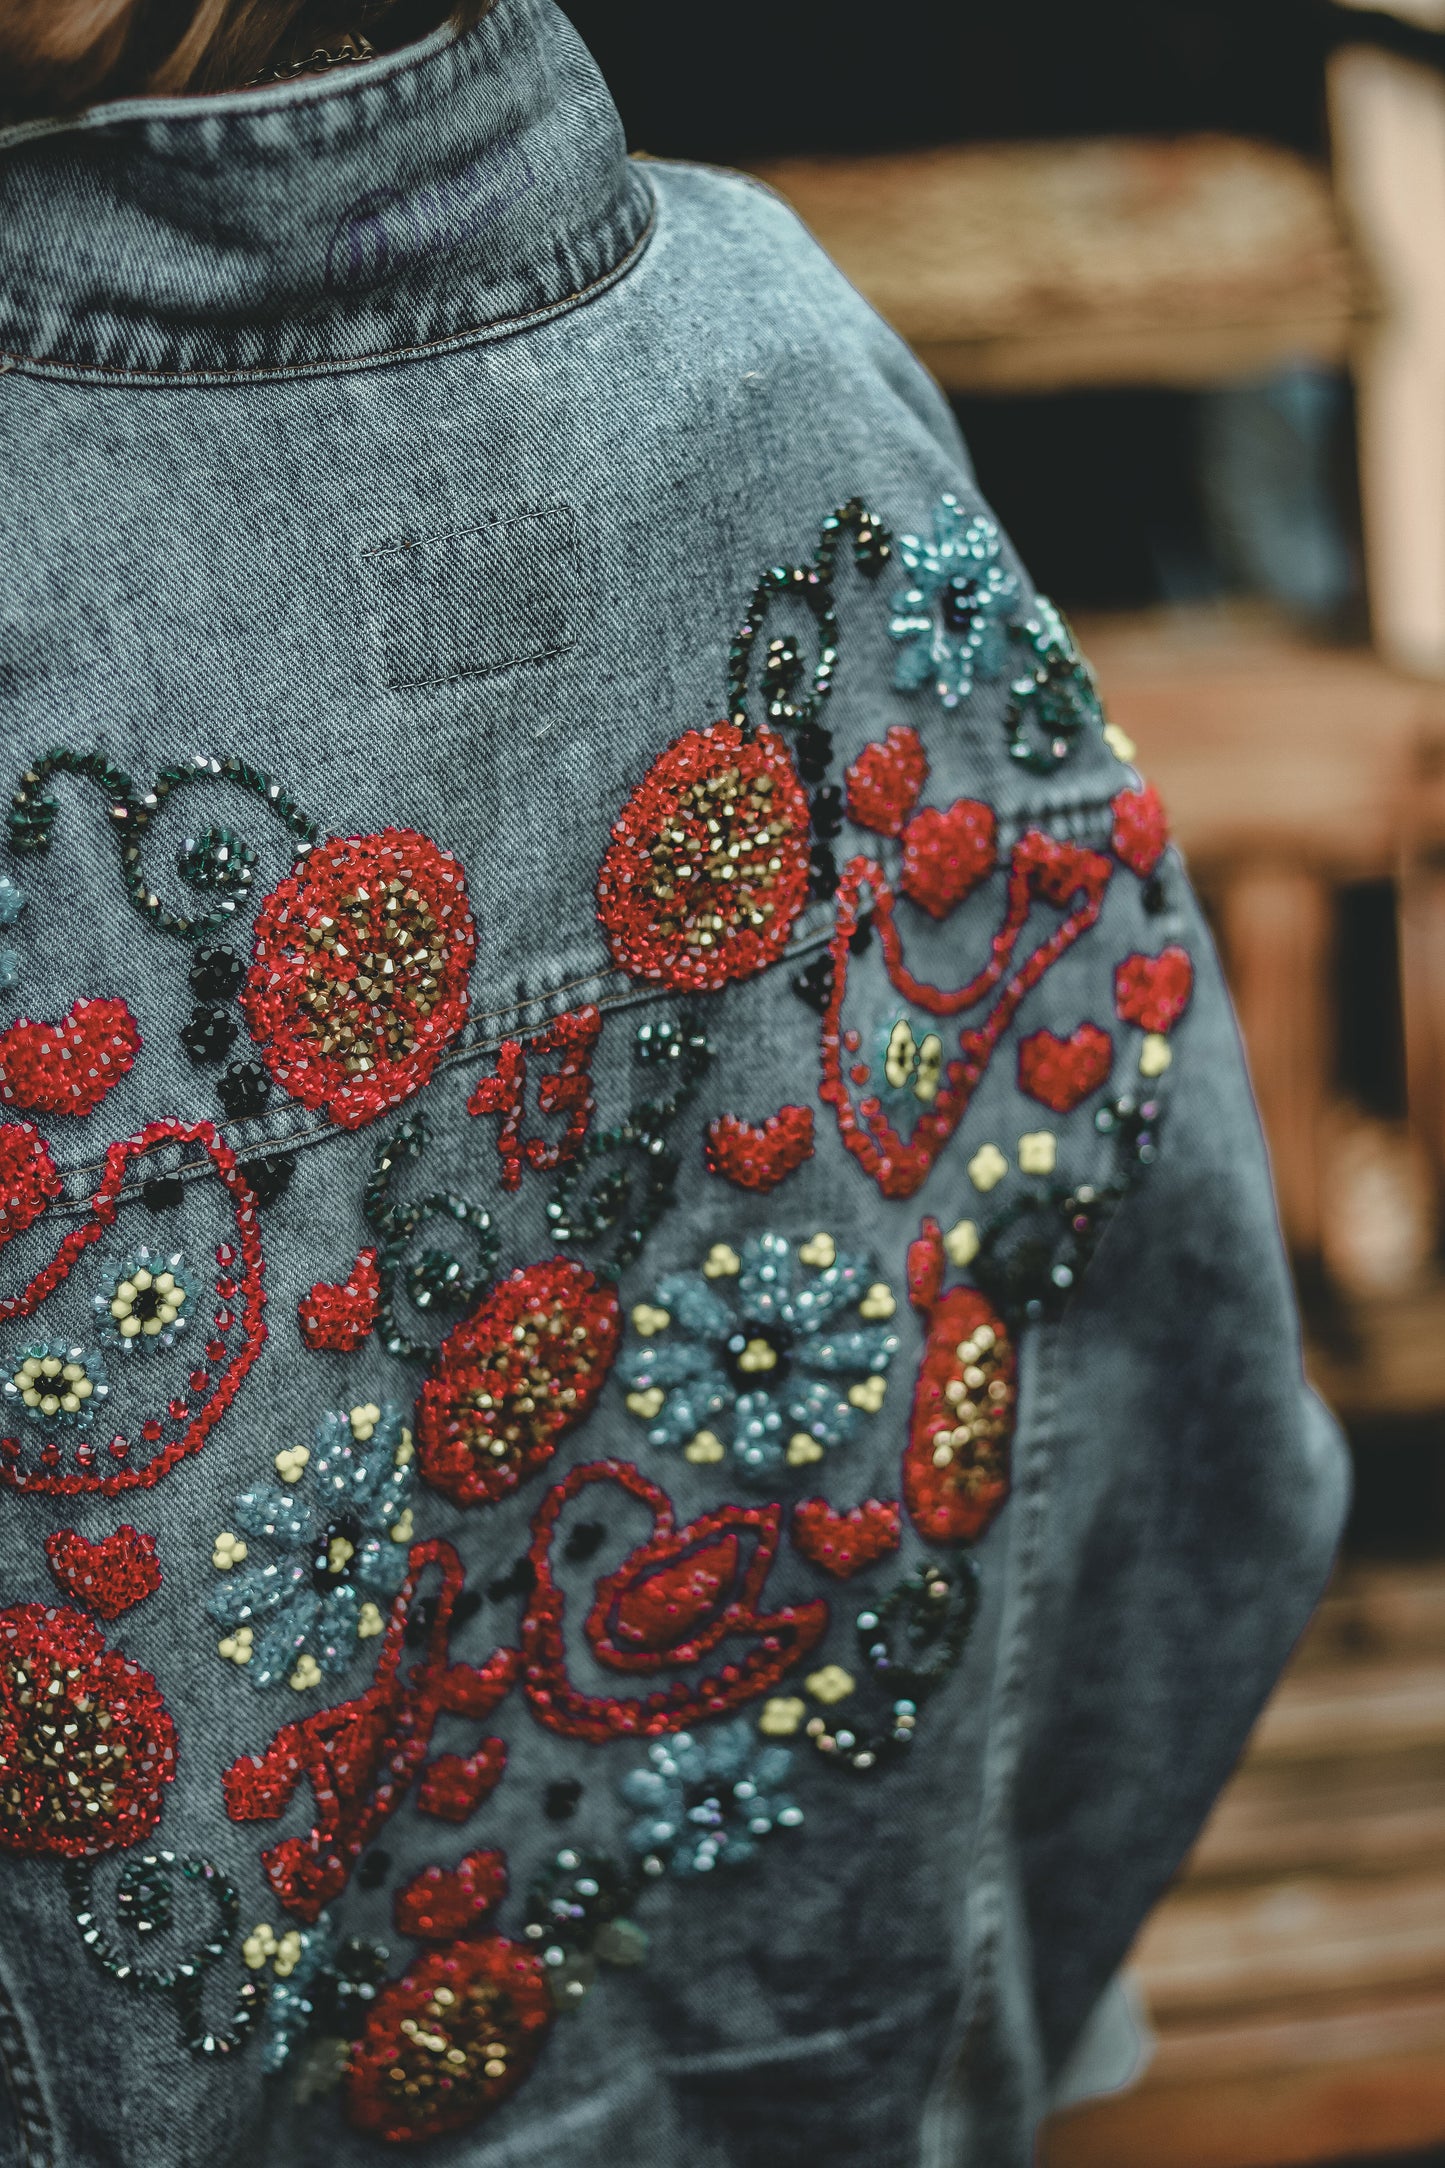 Vintage jeans jacket with crystals embroidery